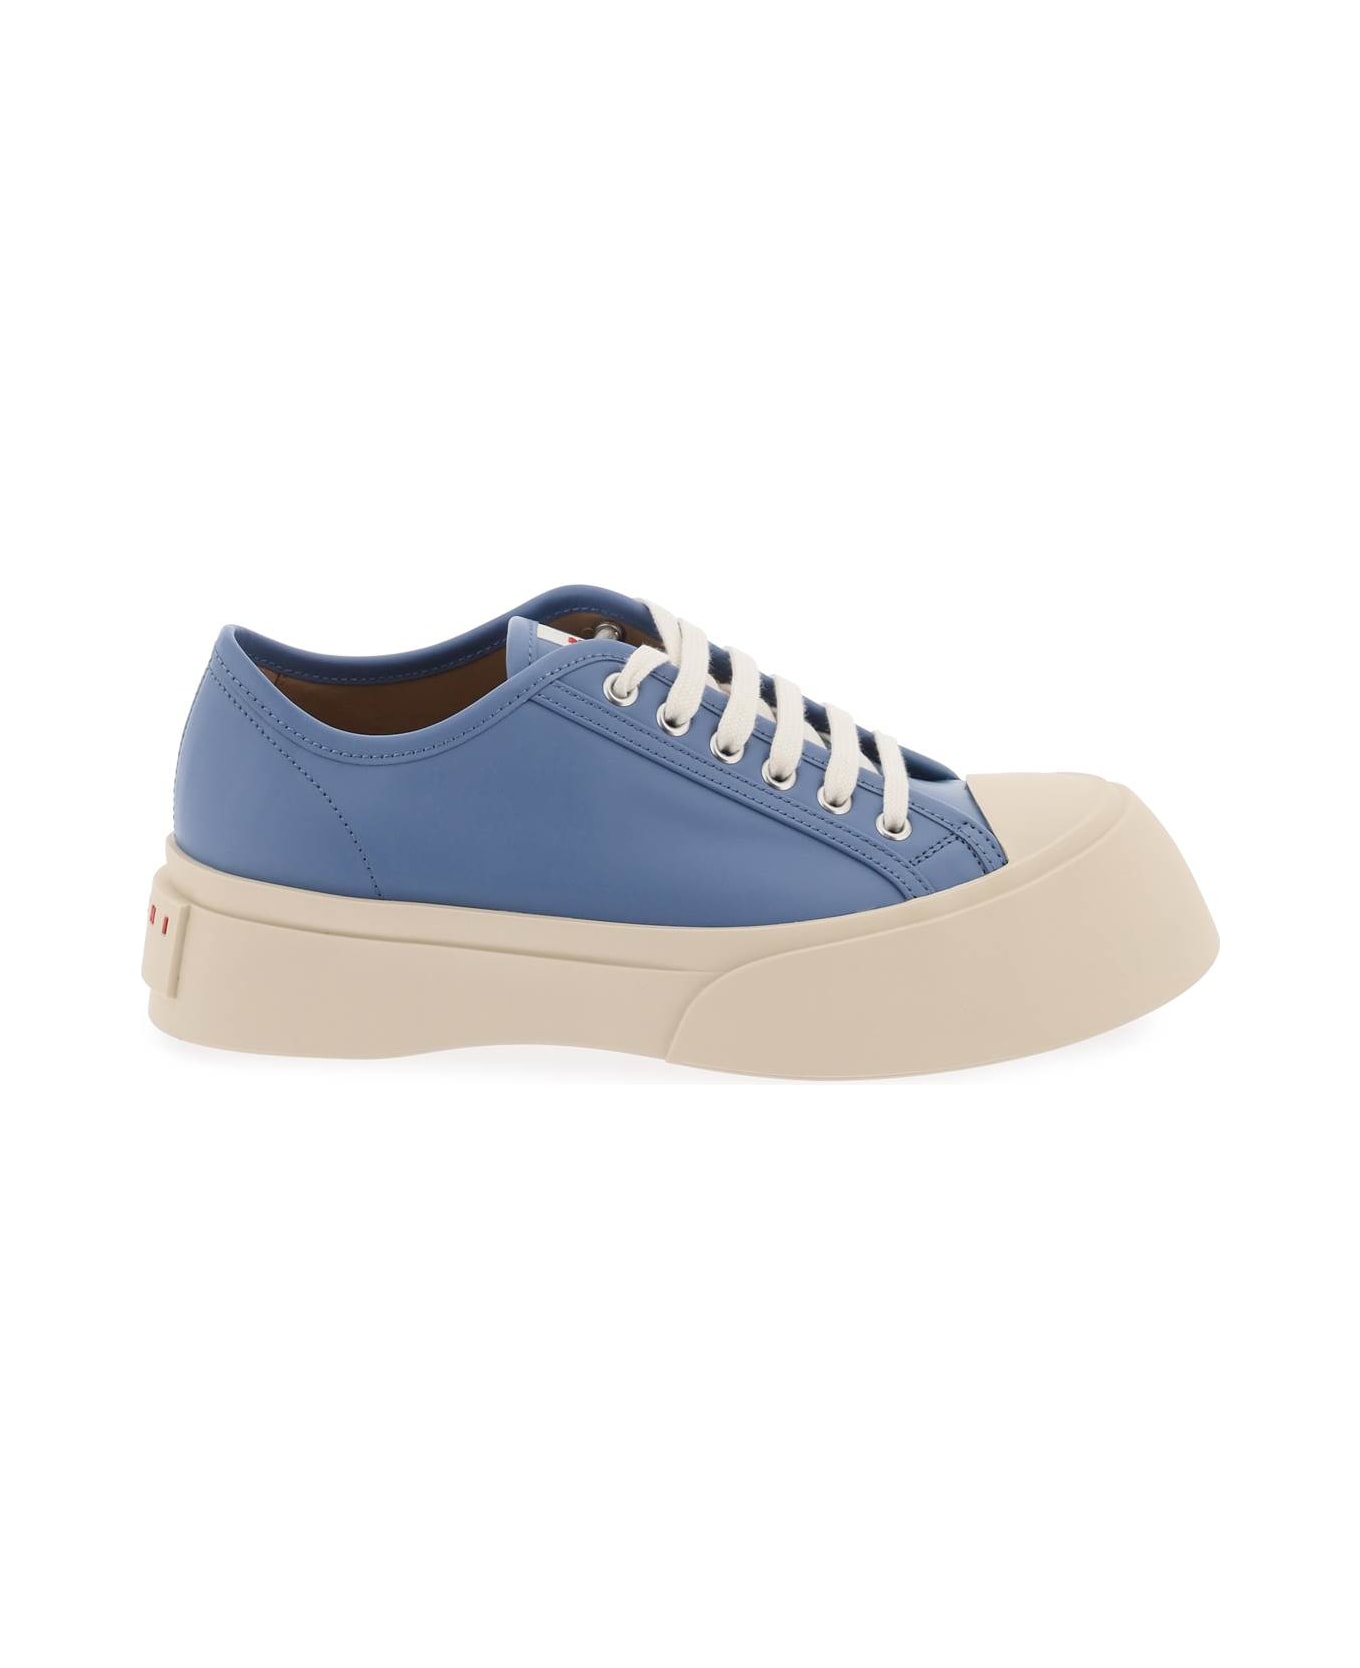 Marni Leather Pablo Sneakers - OPAL (Blue)